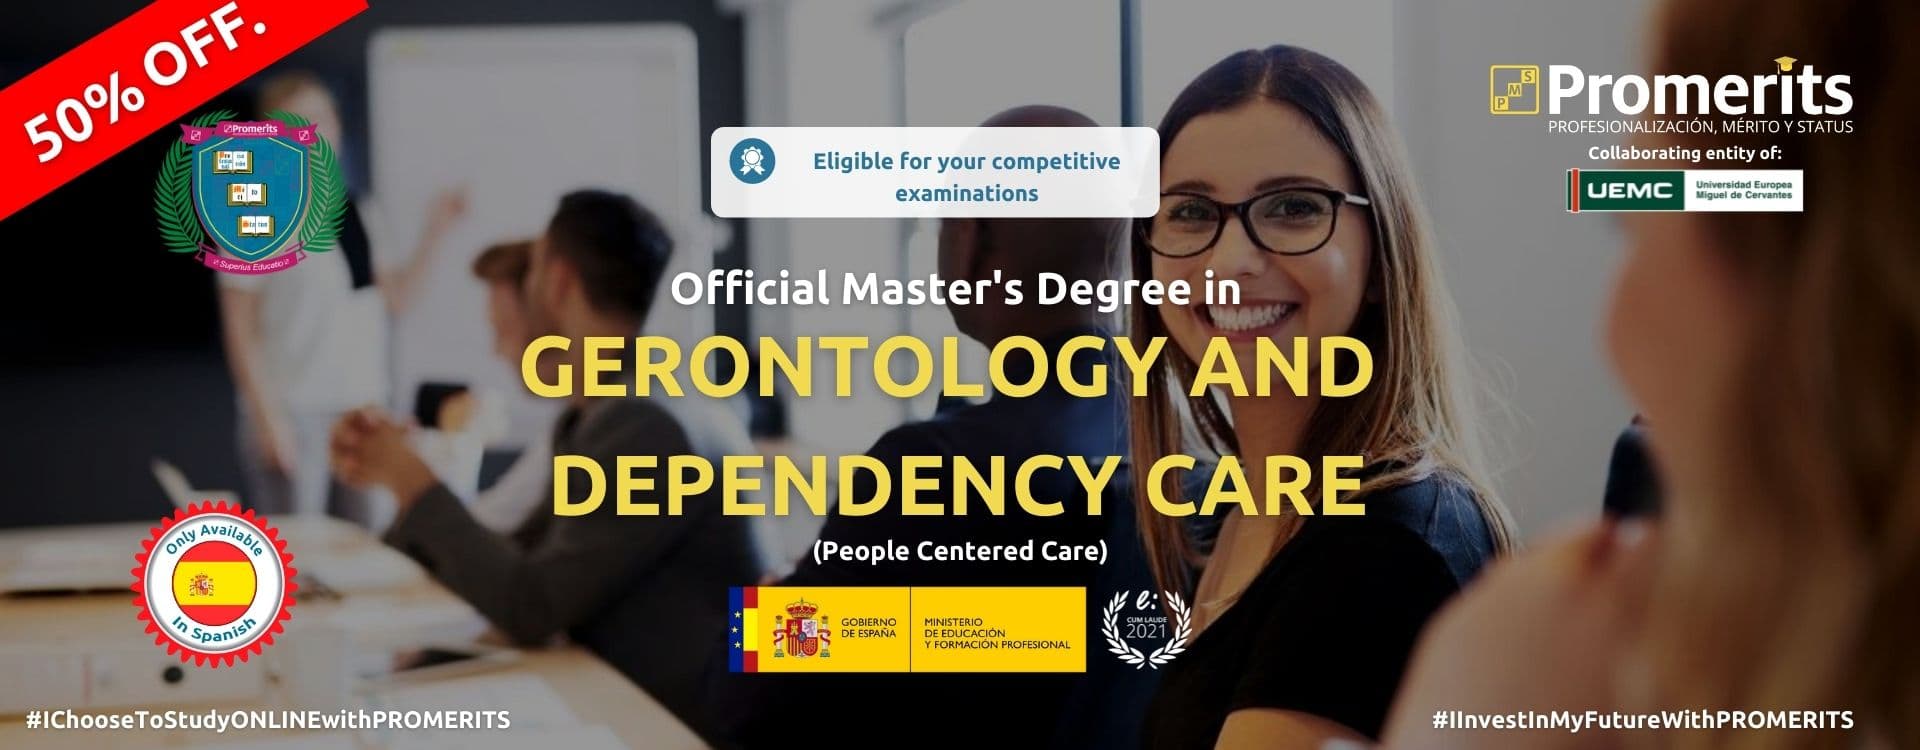 Official Master's Degree in Gerontology and Dependency Care